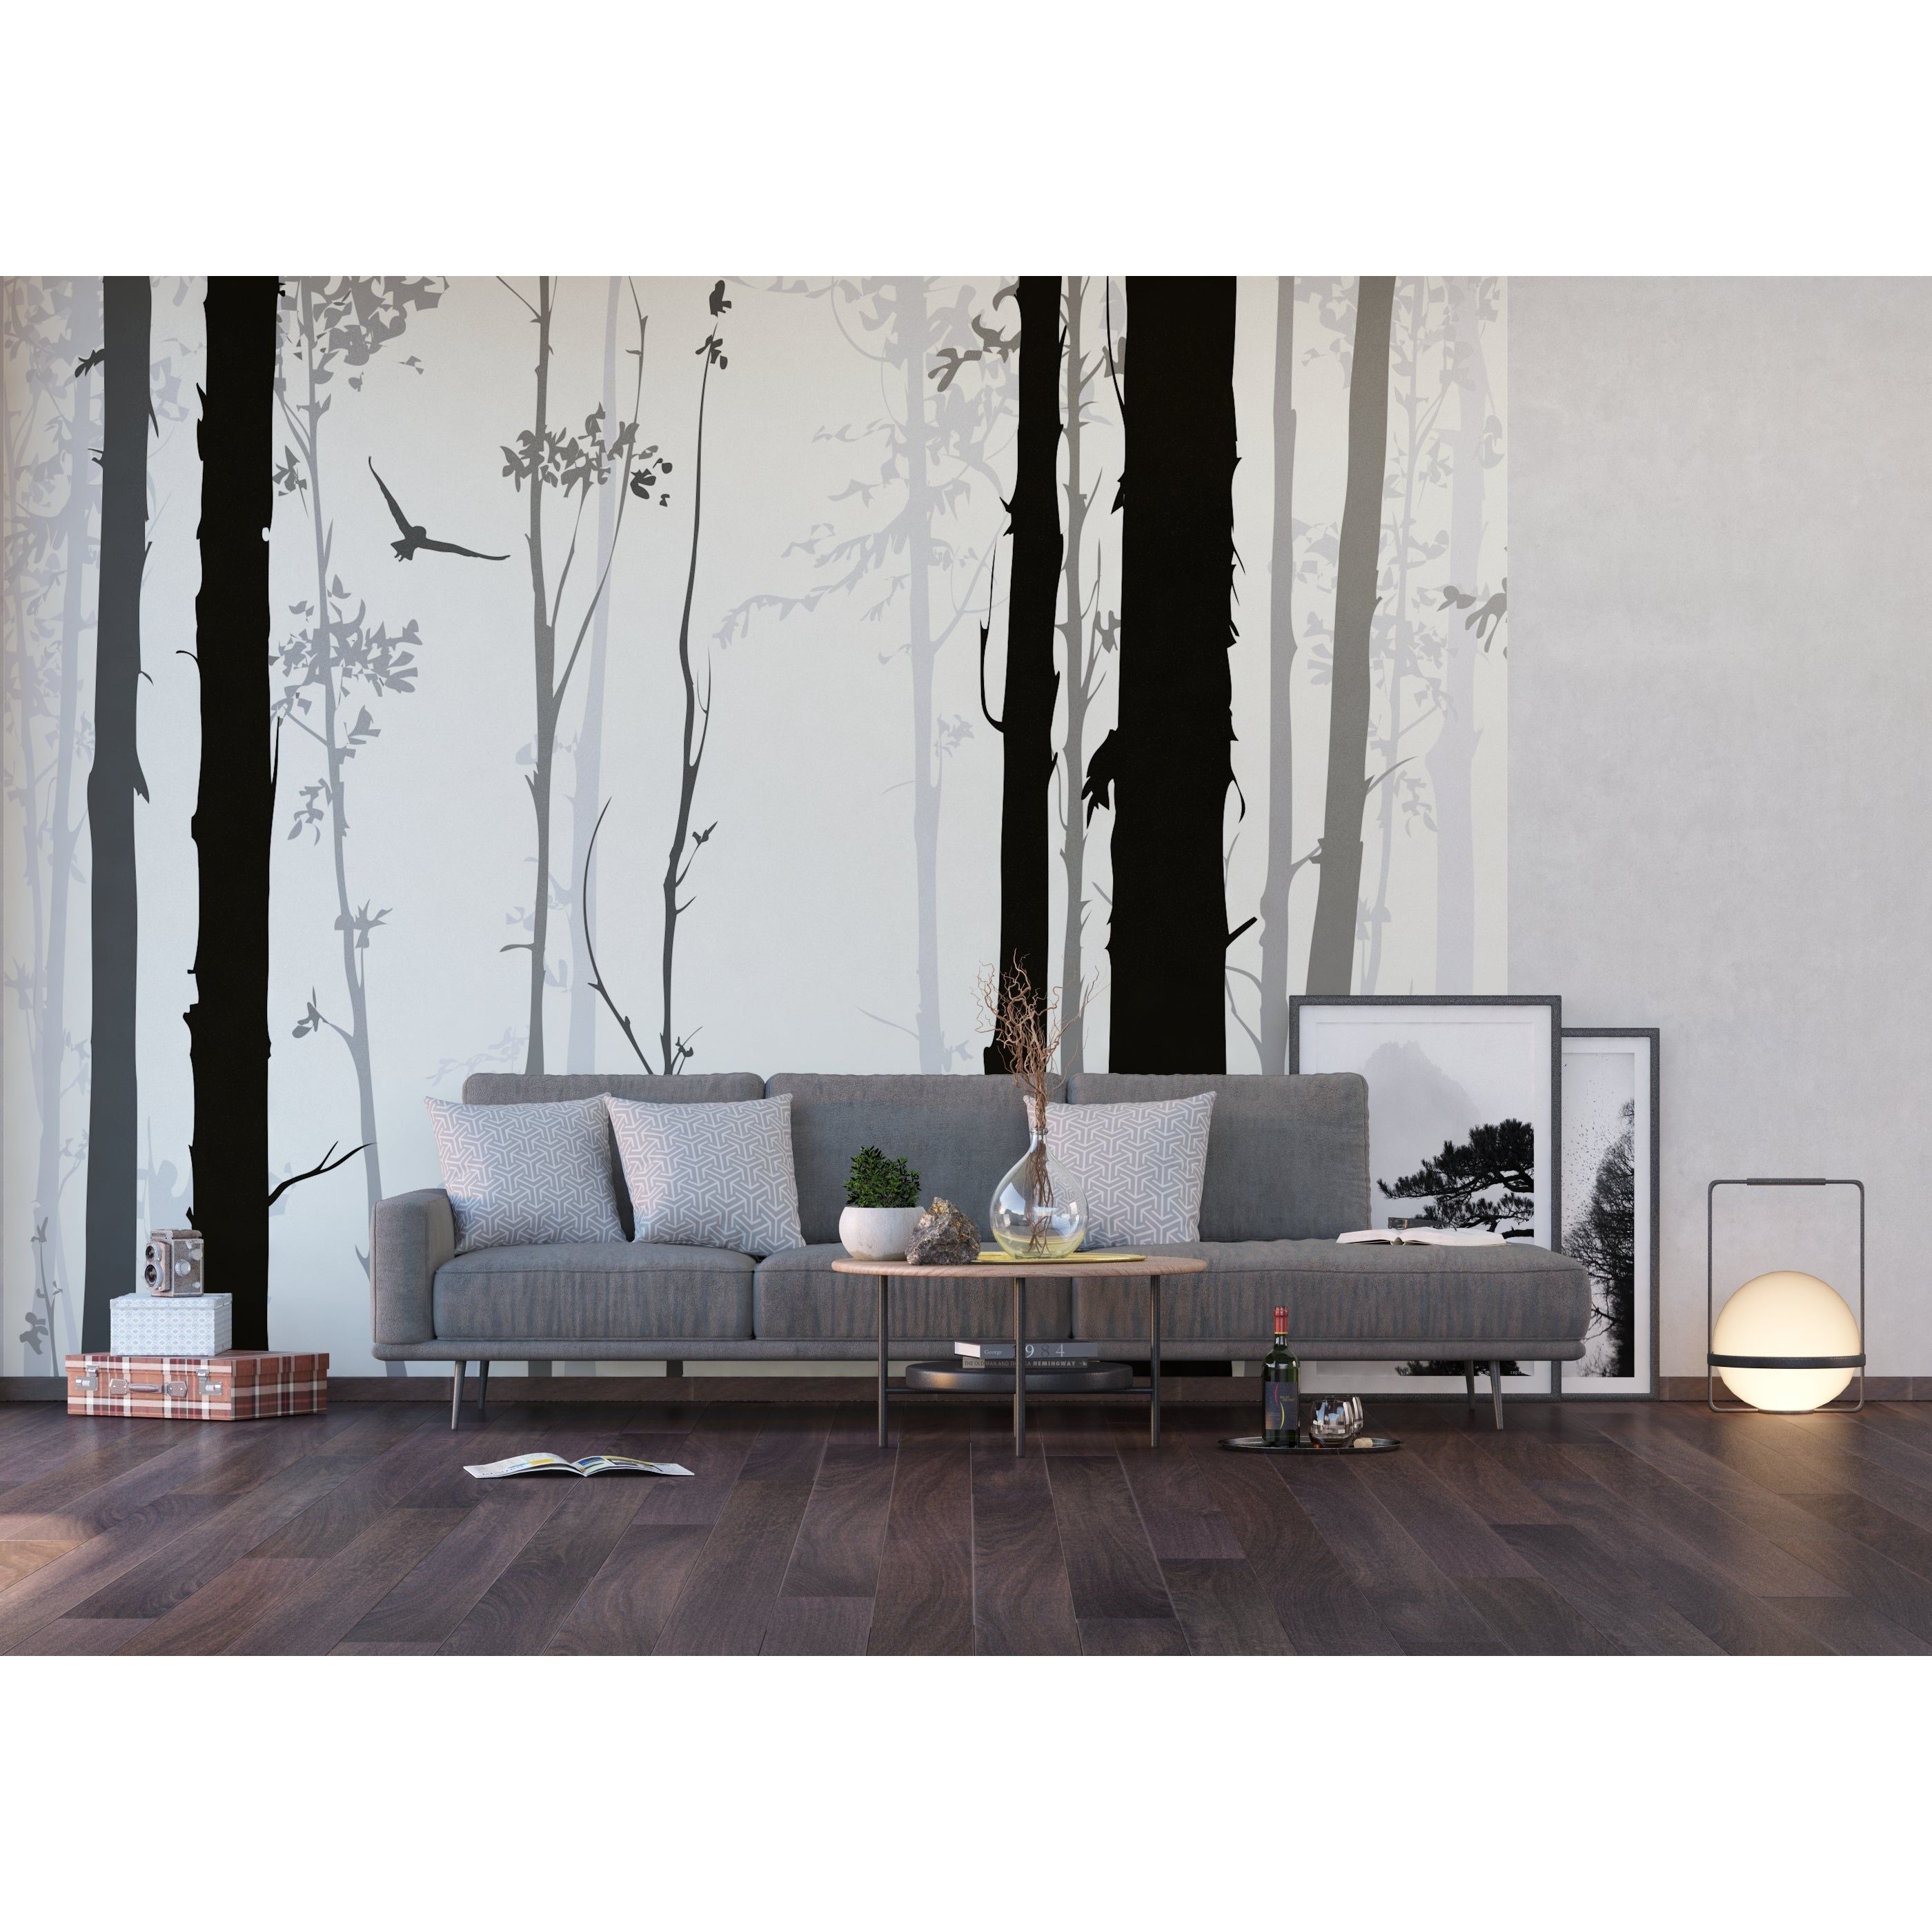 Monochrome Serenity: Black Trees and Birds Wall Mural